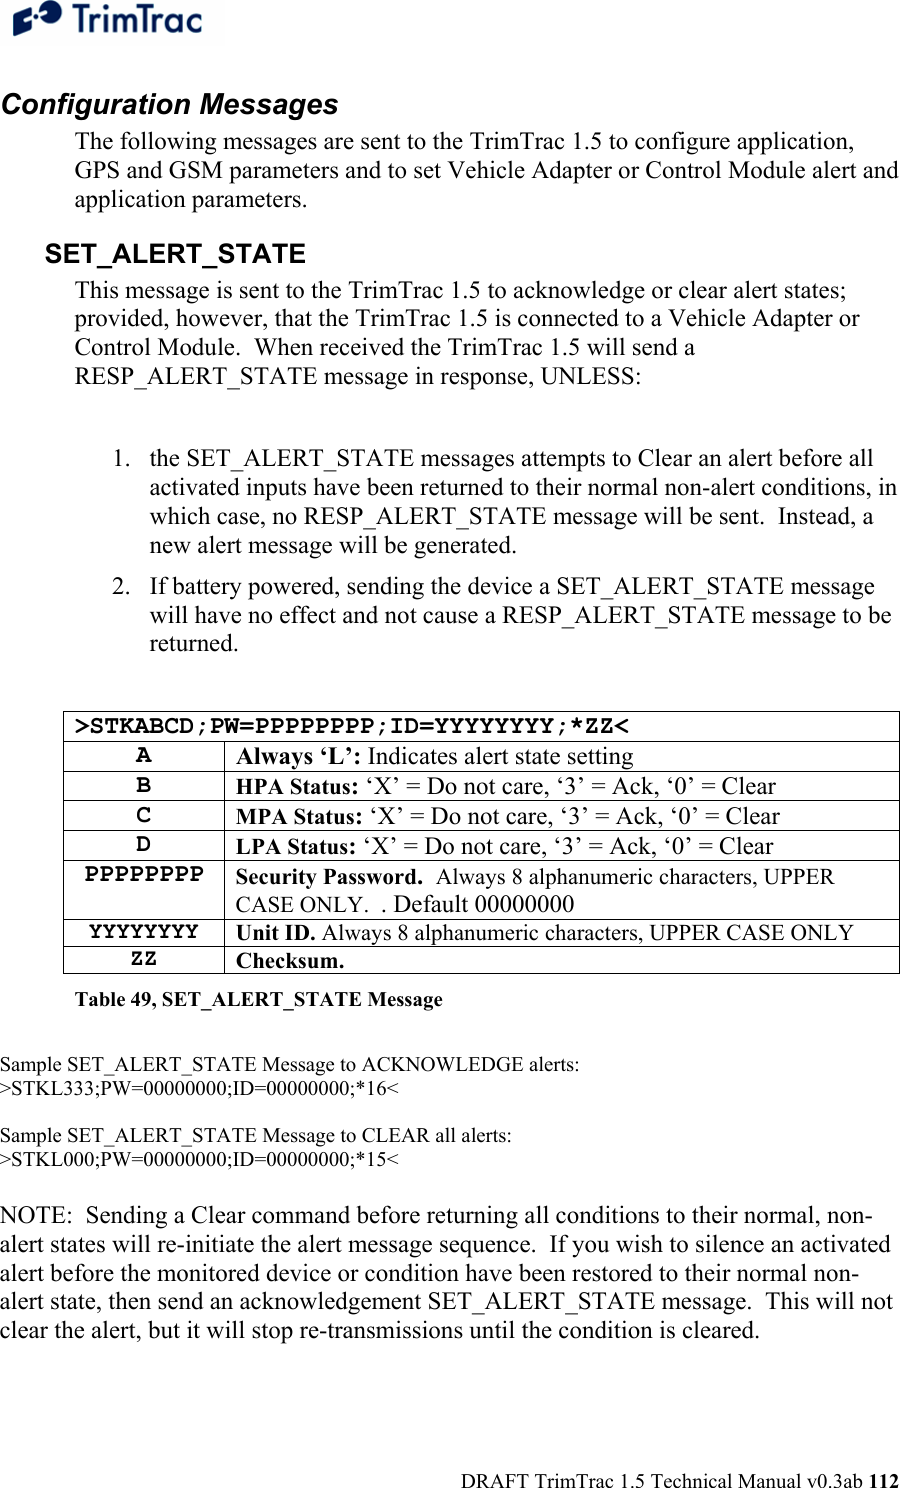  DRAFT TrimTrac 1.5 Technical Manual v0.3ab 112 Configuration Messages The following messages are sent to the TrimTrac 1.5 to configure application, GPS and GSM parameters and to set Vehicle Adapter or Control Module alert and application parameters. SET_ALERT_STATE This message is sent to the TrimTrac 1.5 to acknowledge or clear alert states; provided, however, that the TrimTrac 1.5 is connected to a Vehicle Adapter or Control Module.  When received the TrimTrac 1.5 will send a RESP_ALERT_STATE message in response, UNLESS:  1. the SET_ALERT_STATE messages attempts to Clear an alert before all activated inputs have been returned to their normal non-alert conditions, in which case, no RESP_ALERT_STATE message will be sent.  Instead, a new alert message will be generated. 2. If battery powered, sending the device a SET_ALERT_STATE message will have no effect and not cause a RESP_ALERT_STATE message to be returned.  &gt;STKABCD;PW=PPPPPPPP;ID=YYYYYYYY;*ZZ&lt; A Always ‘L’: Indicates alert state setting B HPA Status: ‘X’ = Do not care, ‘3’ = Ack, ‘0’ = Clear C MPA Status: ‘X’ = Do not care, ‘3’ = Ack, ‘0’ = Clear D LPA Status: ‘X’ = Do not care, ‘3’ = Ack, ‘0’ = Clear PPPPPPPP Security Password.  Always 8 alphanumeric characters, UPPER CASE ONLY.  . Default 00000000 YYYYYYYY Unit ID. Always 8 alphanumeric characters, UPPER CASE ONLY ZZ Checksum.   Table 49, SET_ALERT_STATE Message  Sample SET_ALERT_STATE Message to ACKNOWLEDGE alerts: &gt;STKL333;PW=00000000;ID=00000000;*16&lt;  Sample SET_ALERT_STATE Message to CLEAR all alerts: &gt;STKL000;PW=00000000;ID=00000000;*15&lt;  NOTE:  Sending a Clear command before returning all conditions to their normal, non-alert states will re-initiate the alert message sequence.  If you wish to silence an activated alert before the monitored device or condition have been restored to their normal non-alert state, then send an acknowledgement SET_ALERT_STATE message.  This will not clear the alert, but it will stop re-transmissions until the condition is cleared. 